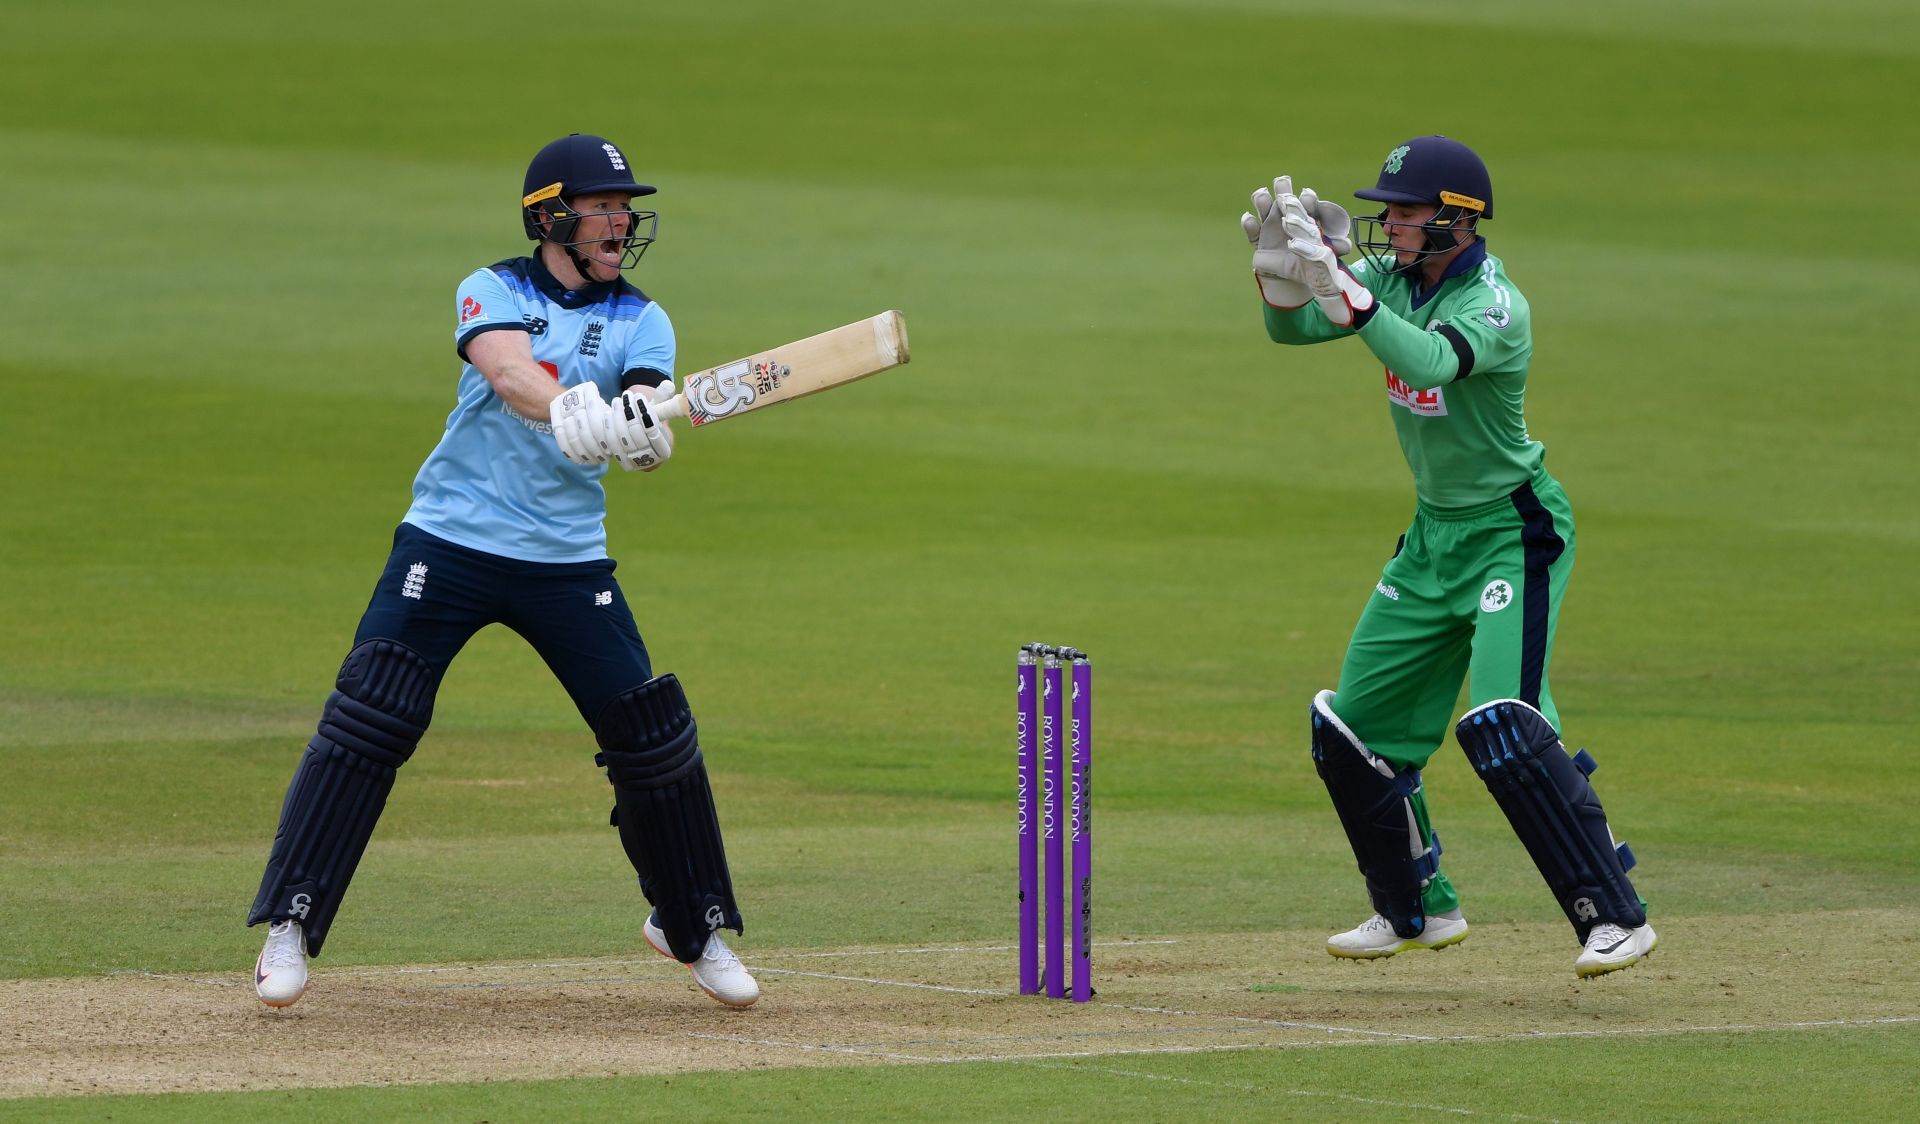 Eoin Morgan represented Ireland before switching to play for England